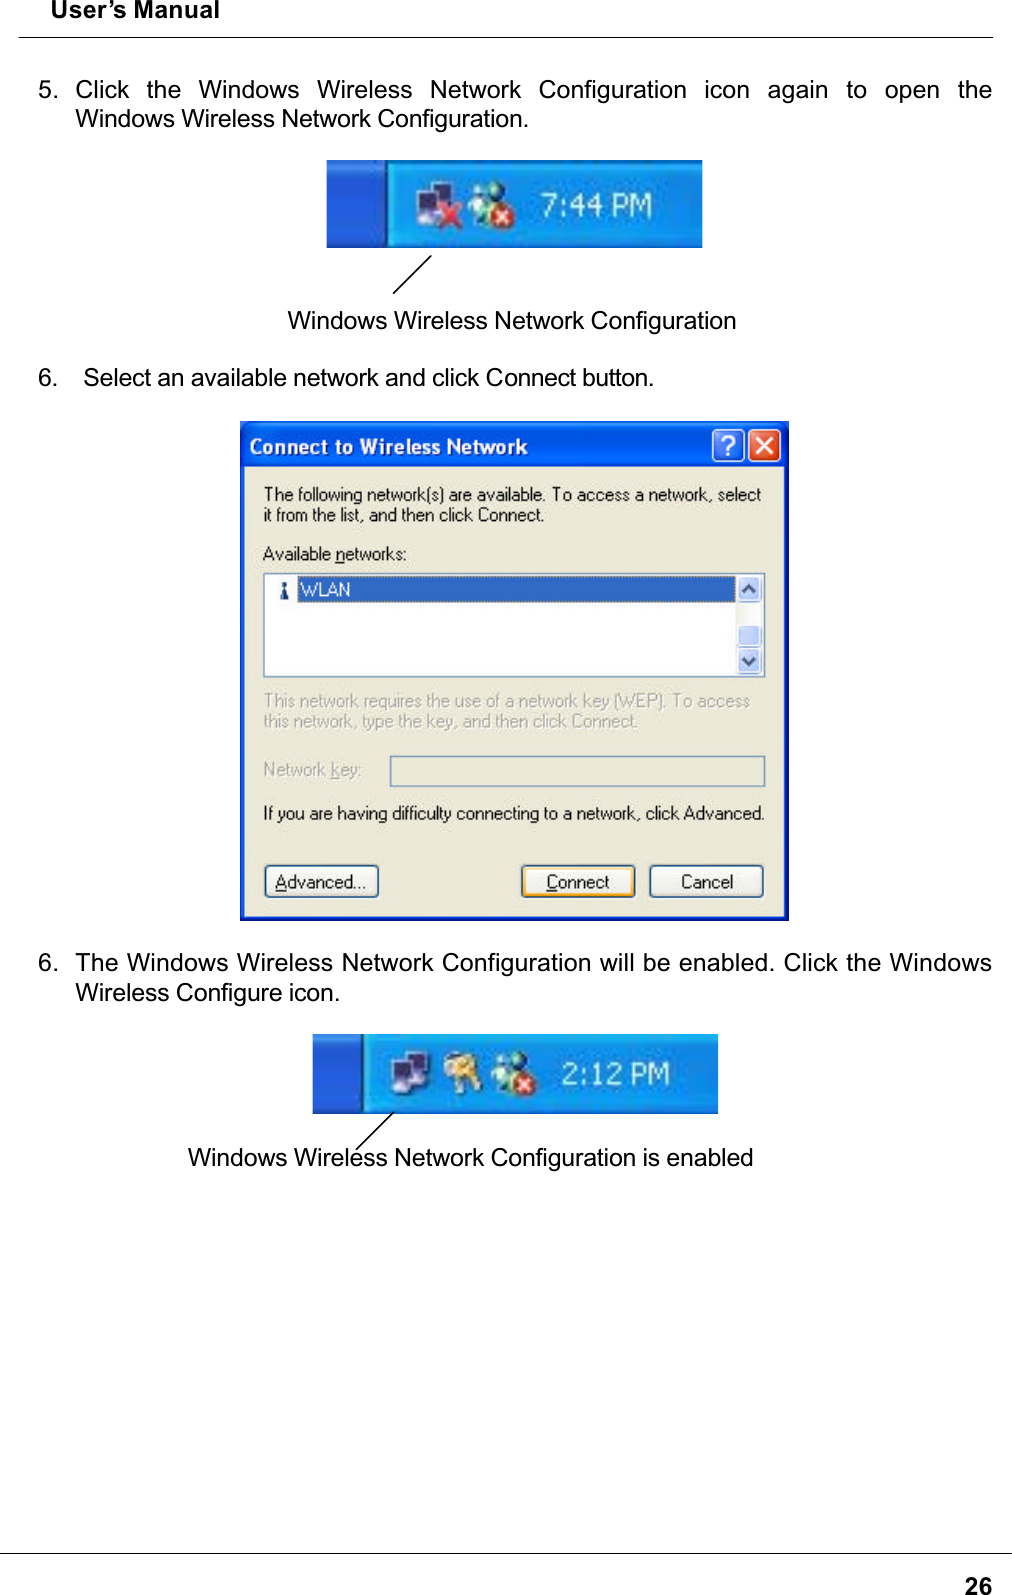  User’s Manual265. Click the Windows Wireless Network Configuration icon again to open theWindows Wireless Network Configuration.Windows Wireless Network Configuration6. Select an available network and click Connect button.6. The Windows Wireless Network Configuration will be enabled. Click the Windows Wireless Configure icon.Windows Wireless Network Configuration is enabled